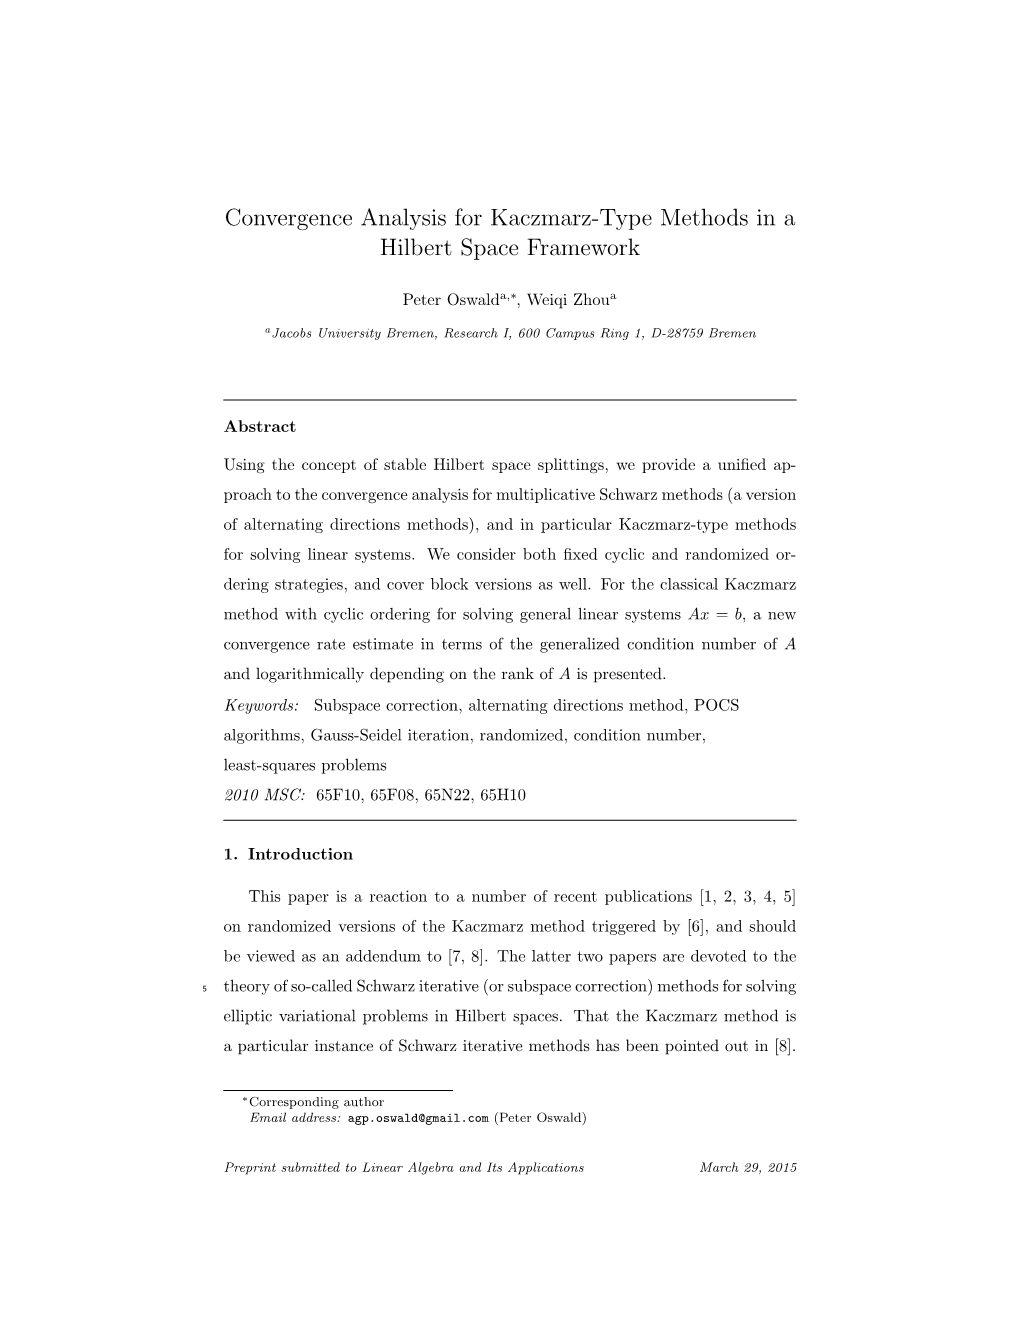 Convergence Analysis for Kaczmarz-Type Methods in a Hilbert Space Framework